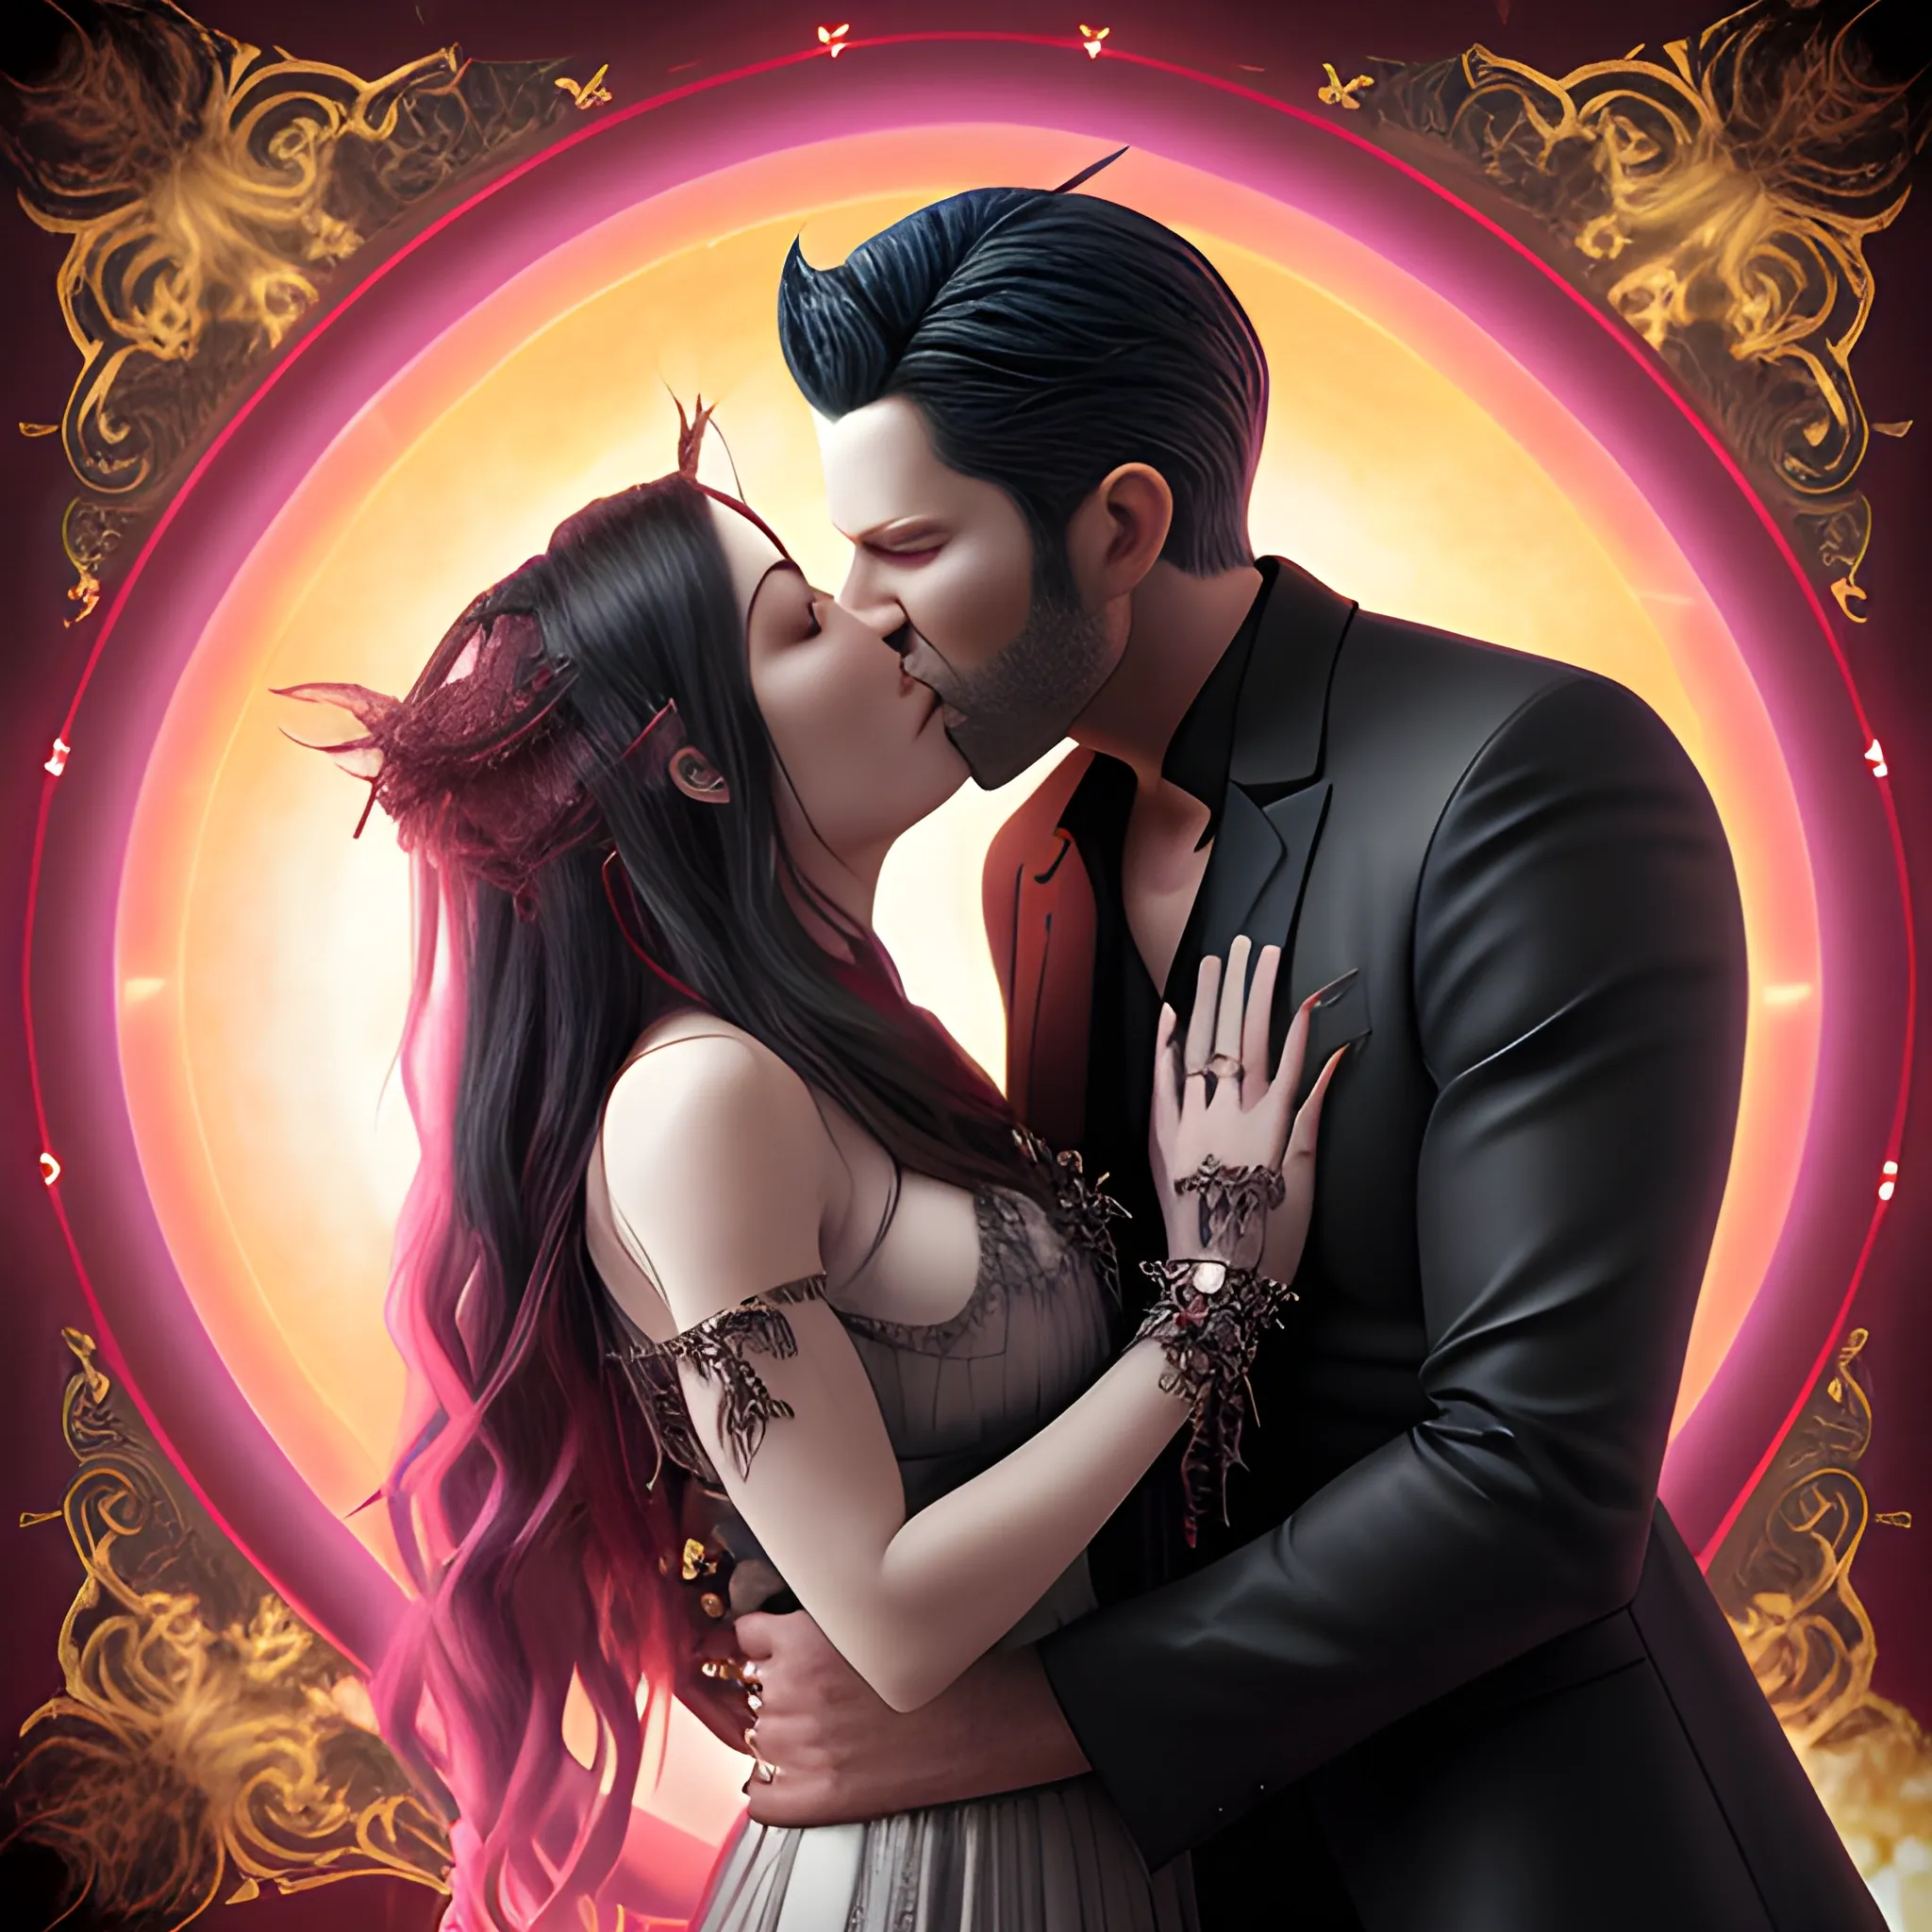 Lucifer's hidden energy towards me and holding me within in his arms and kissing me, 3D